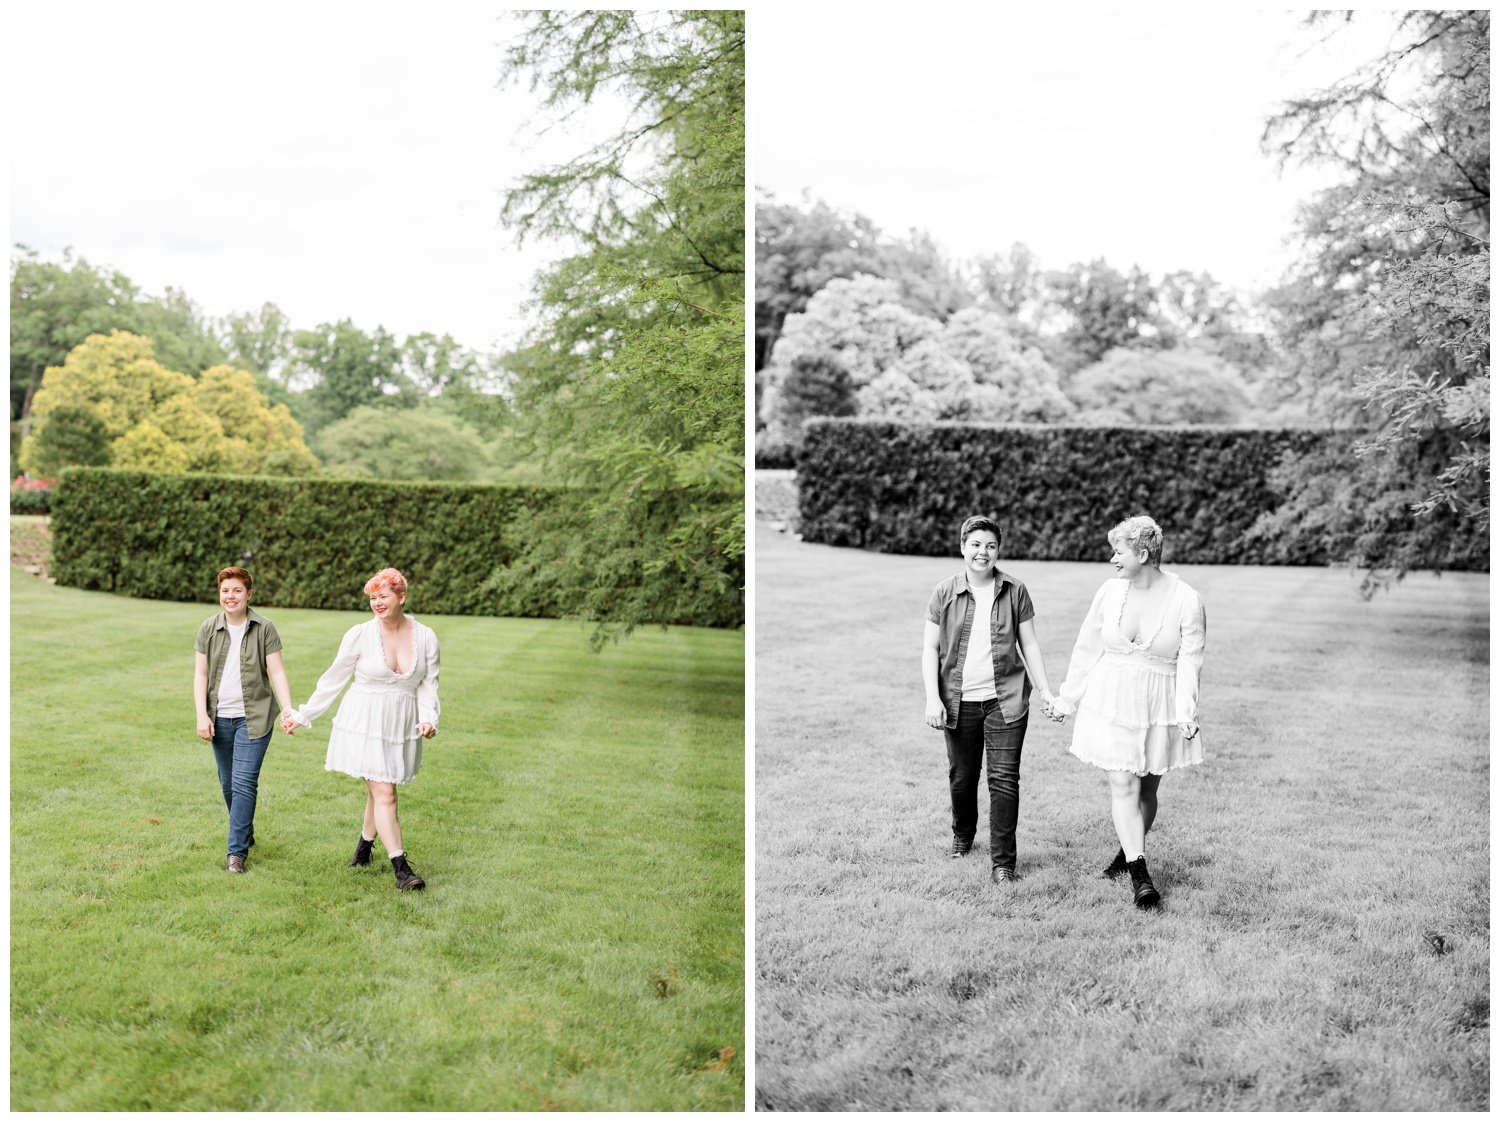 Queer-Engagement-Photos-Longwood-Gardens-Philly-Photographer-LGBTQ-2.jpg